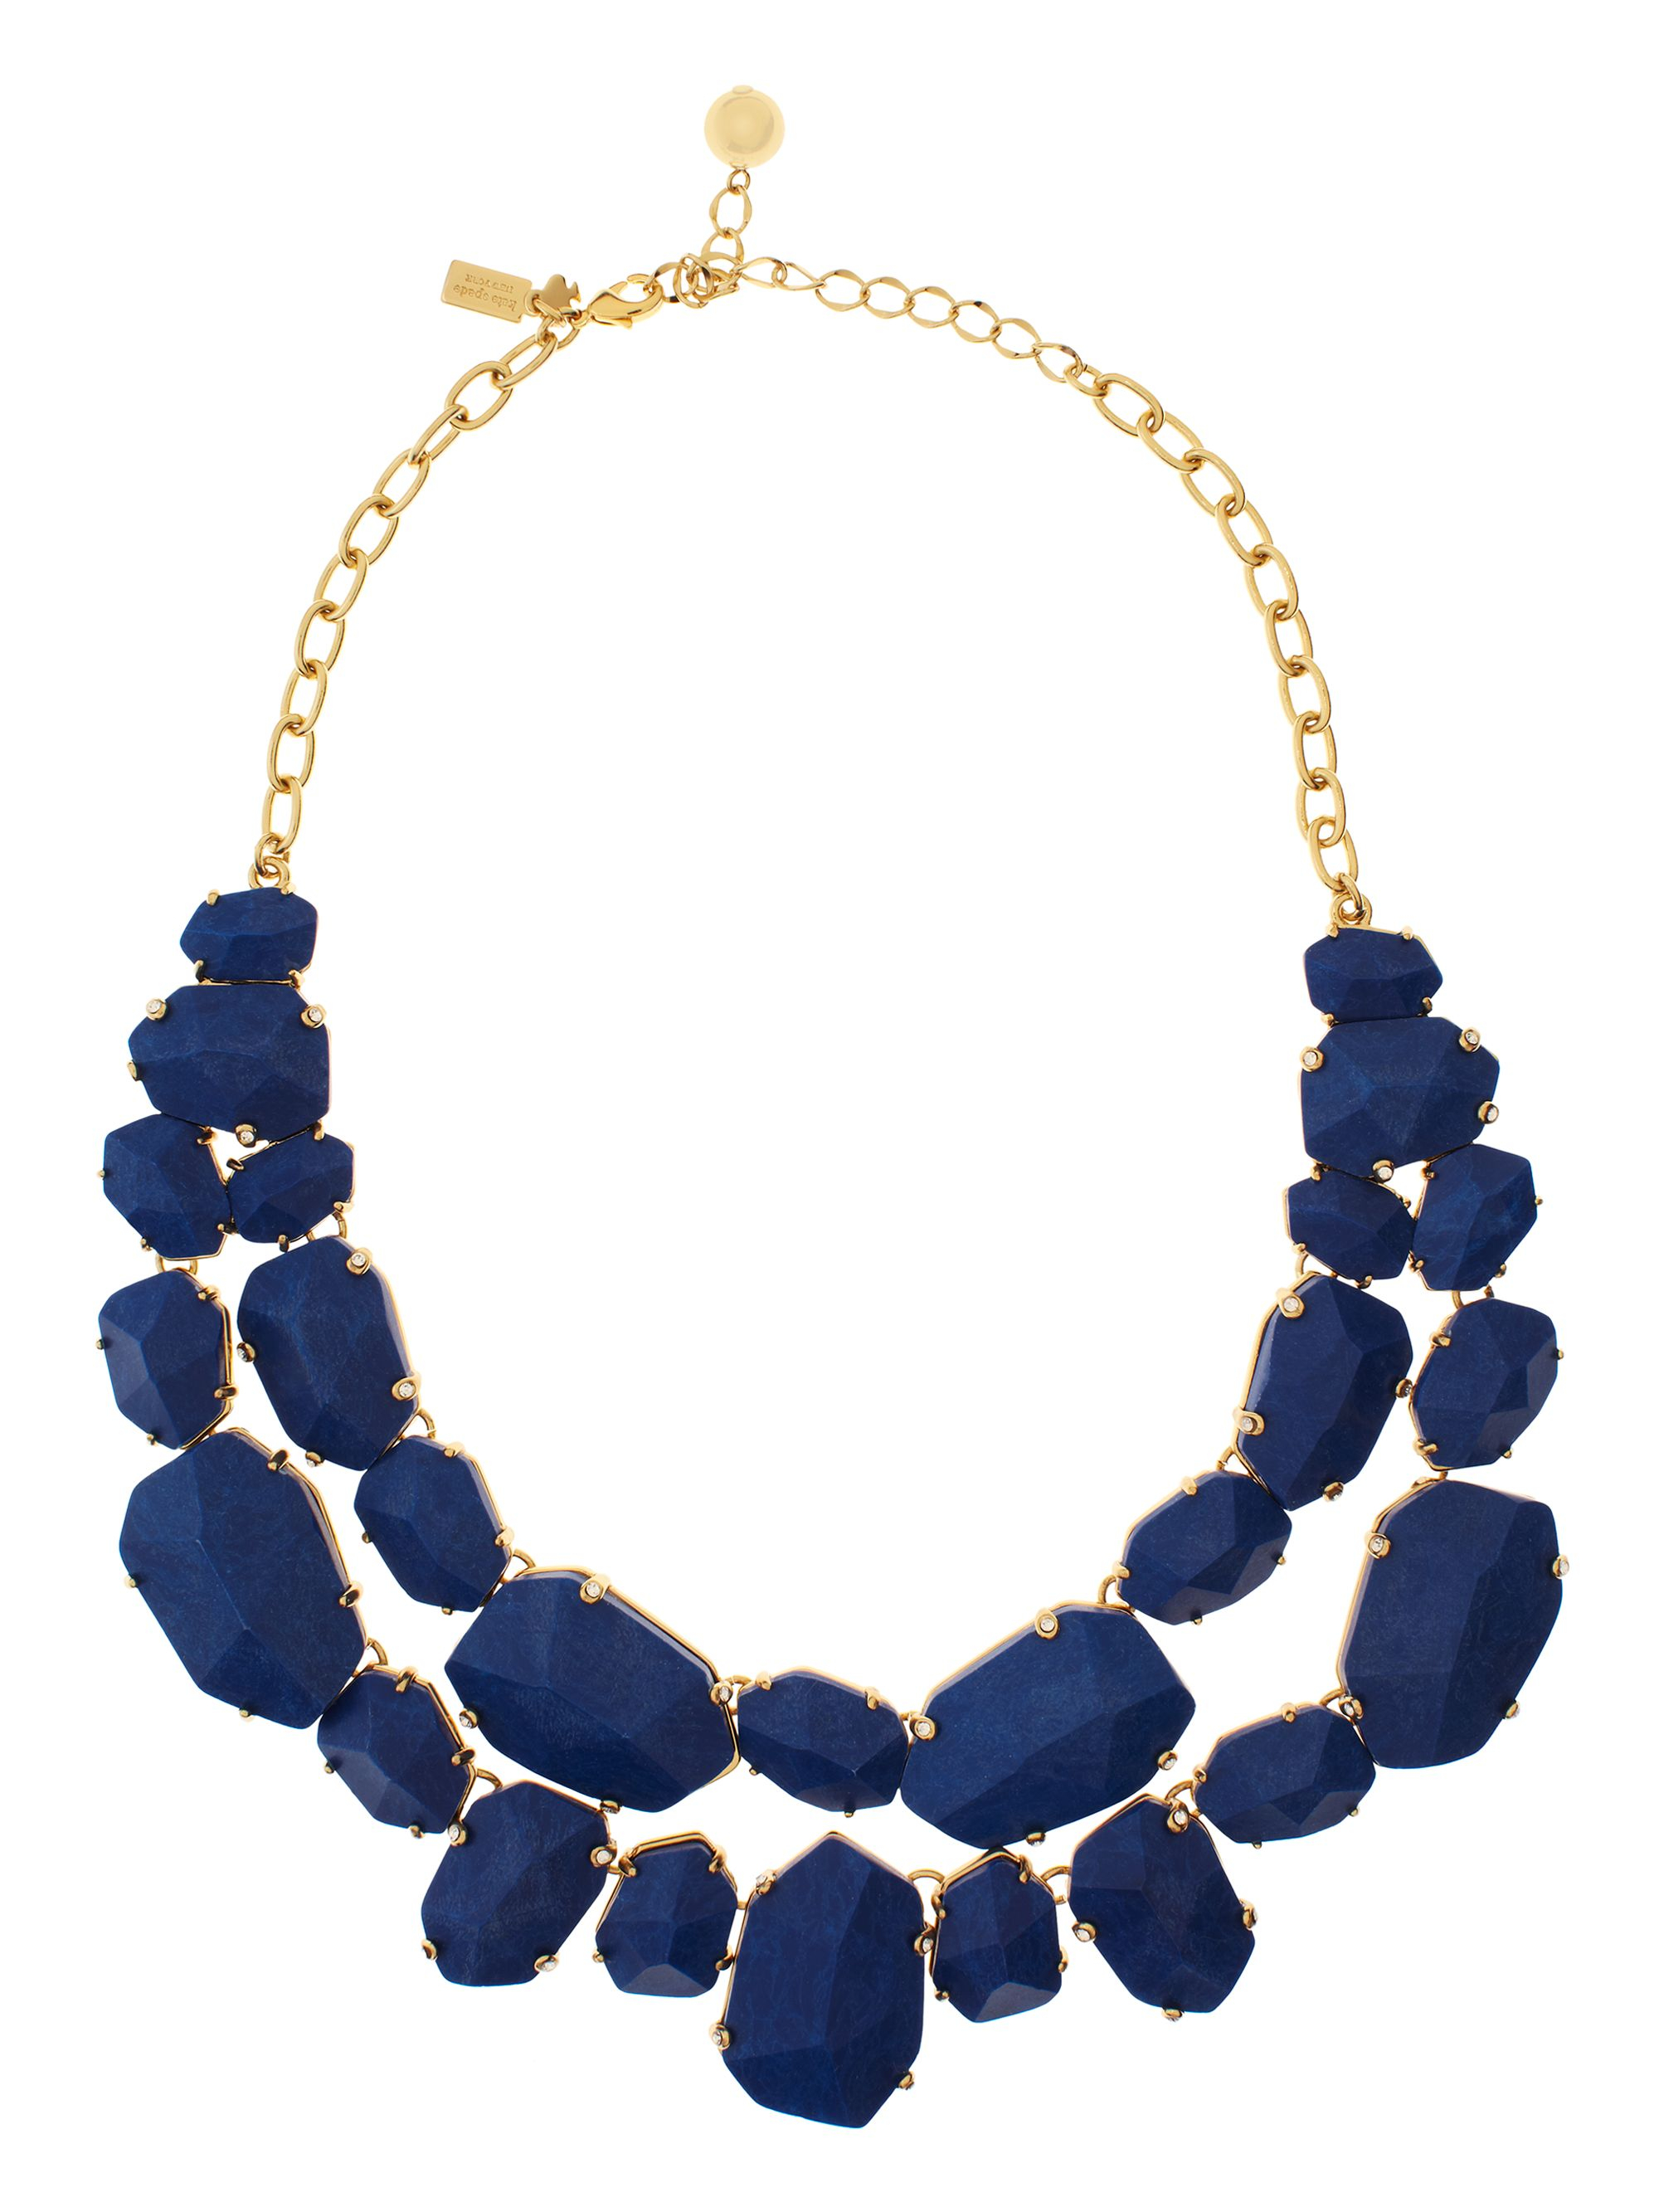 Kate Spade Quarry Gems Statement Necklace in Blue - Lyst